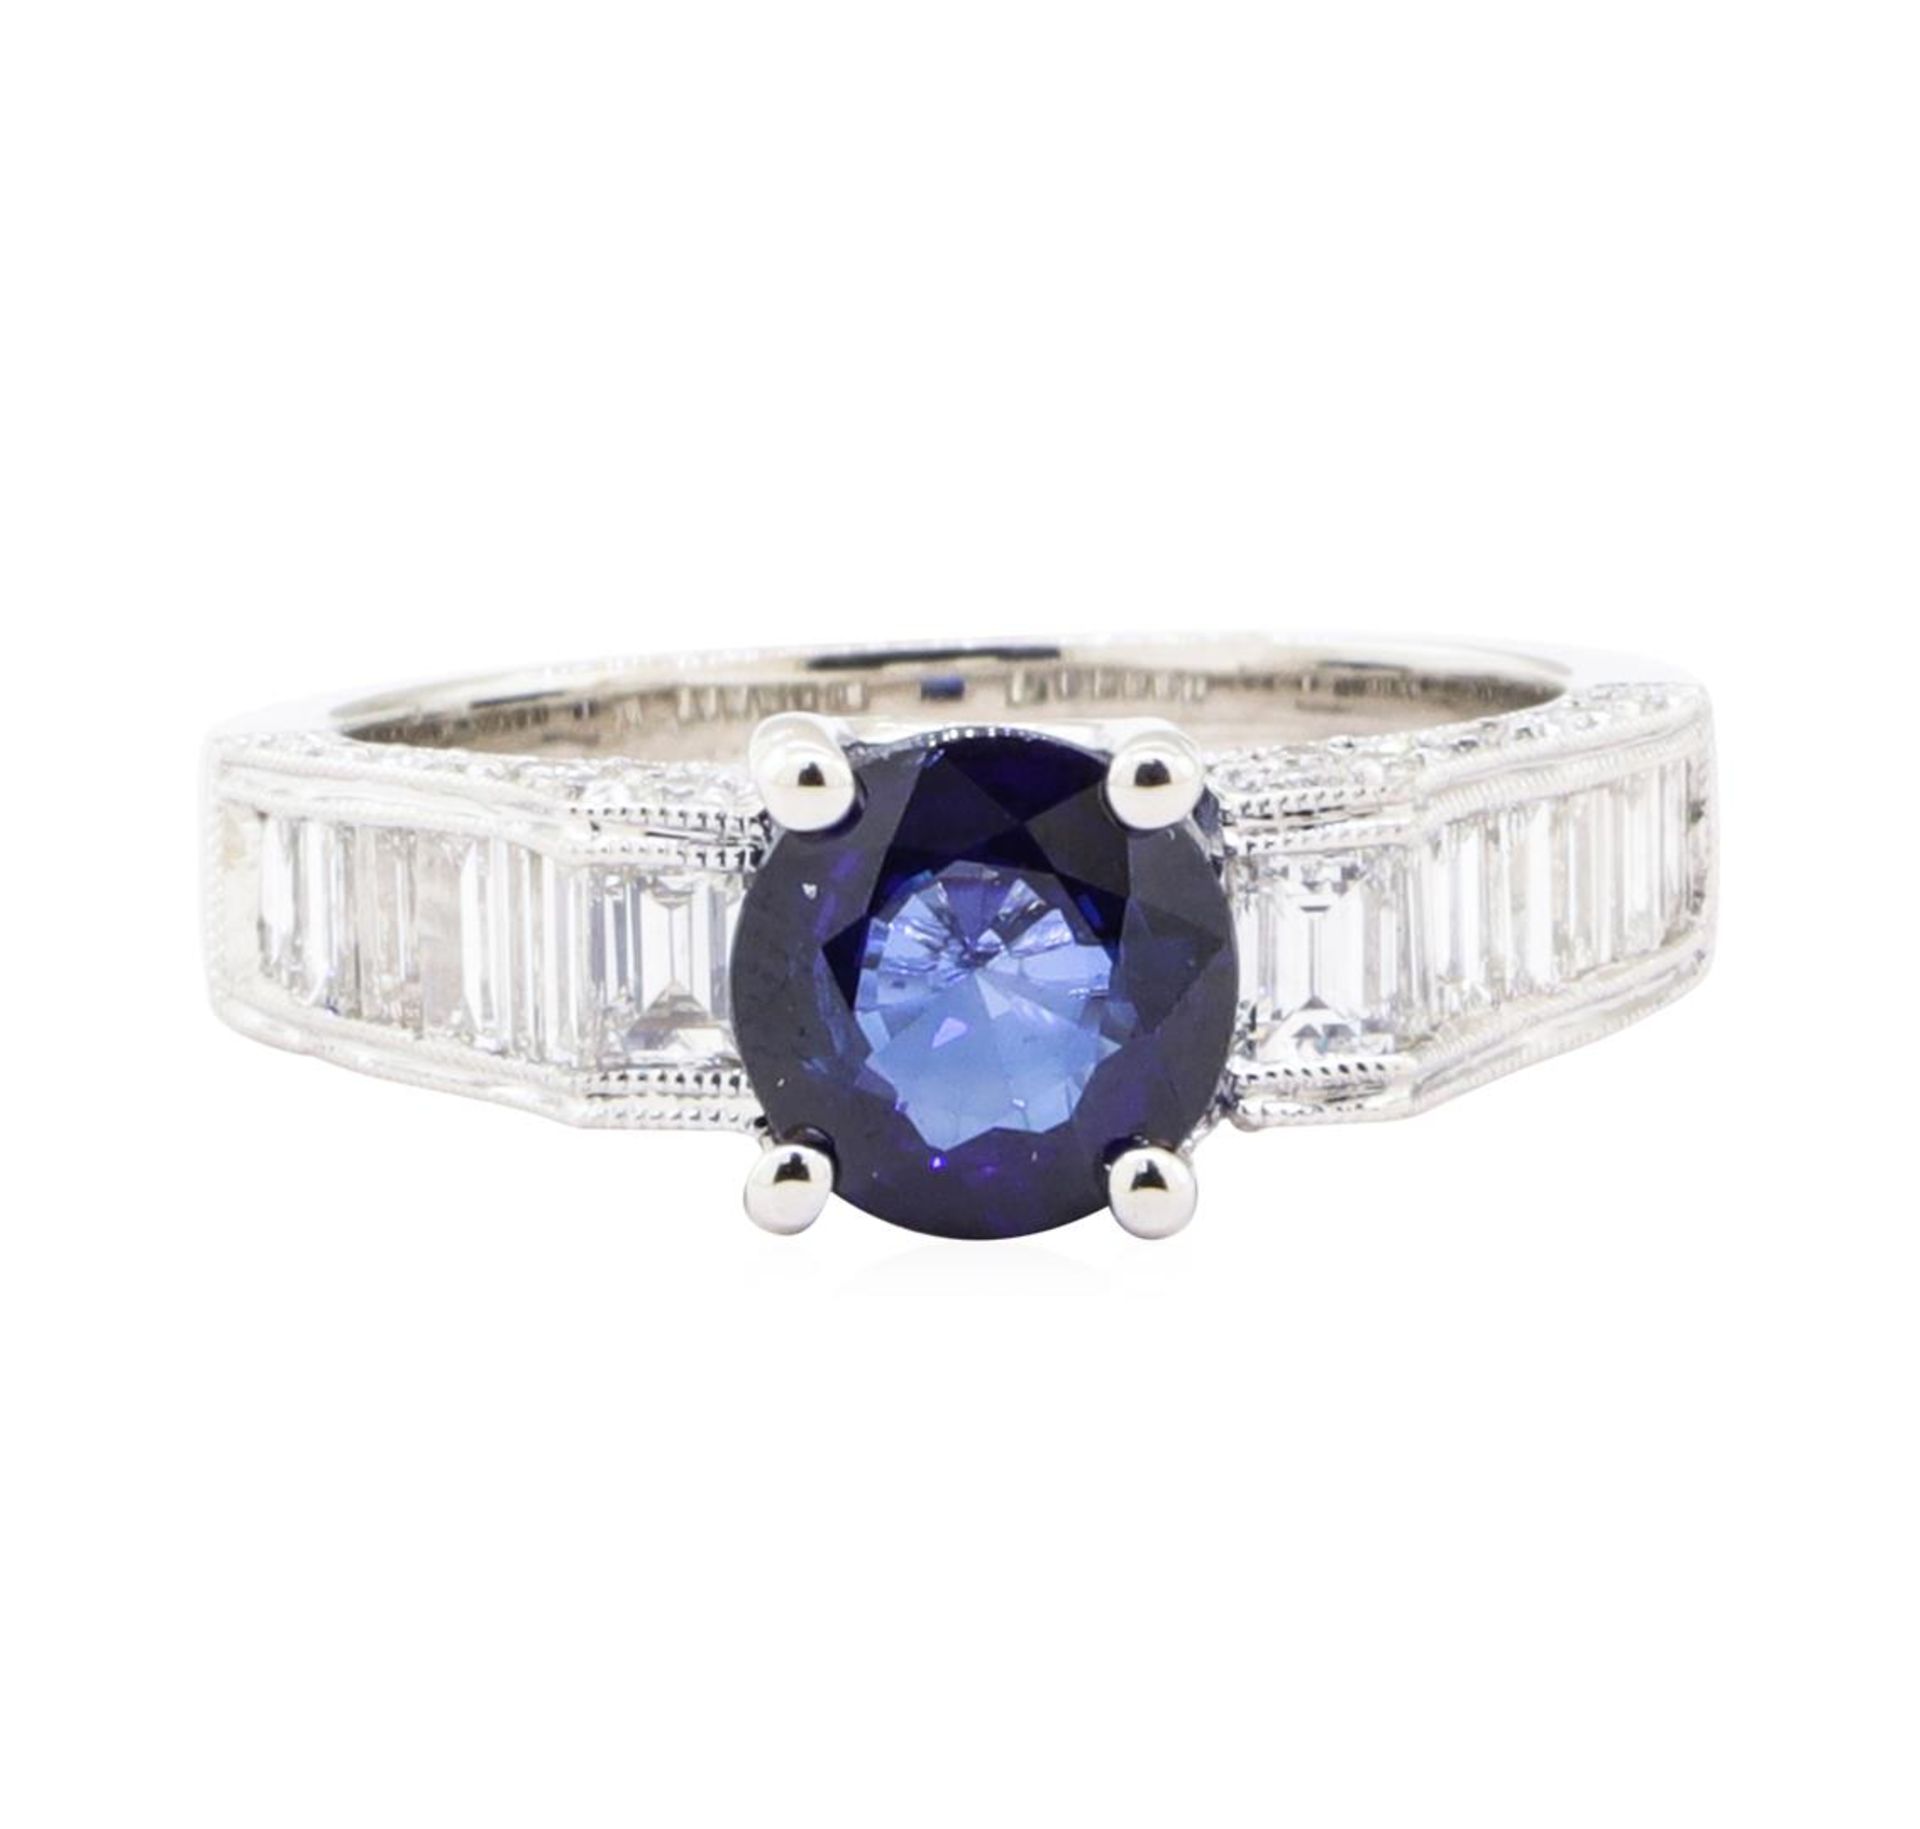 2.60 ctw Sapphire And Diamond Ring - 18KT White Gold - Image 2 of 5